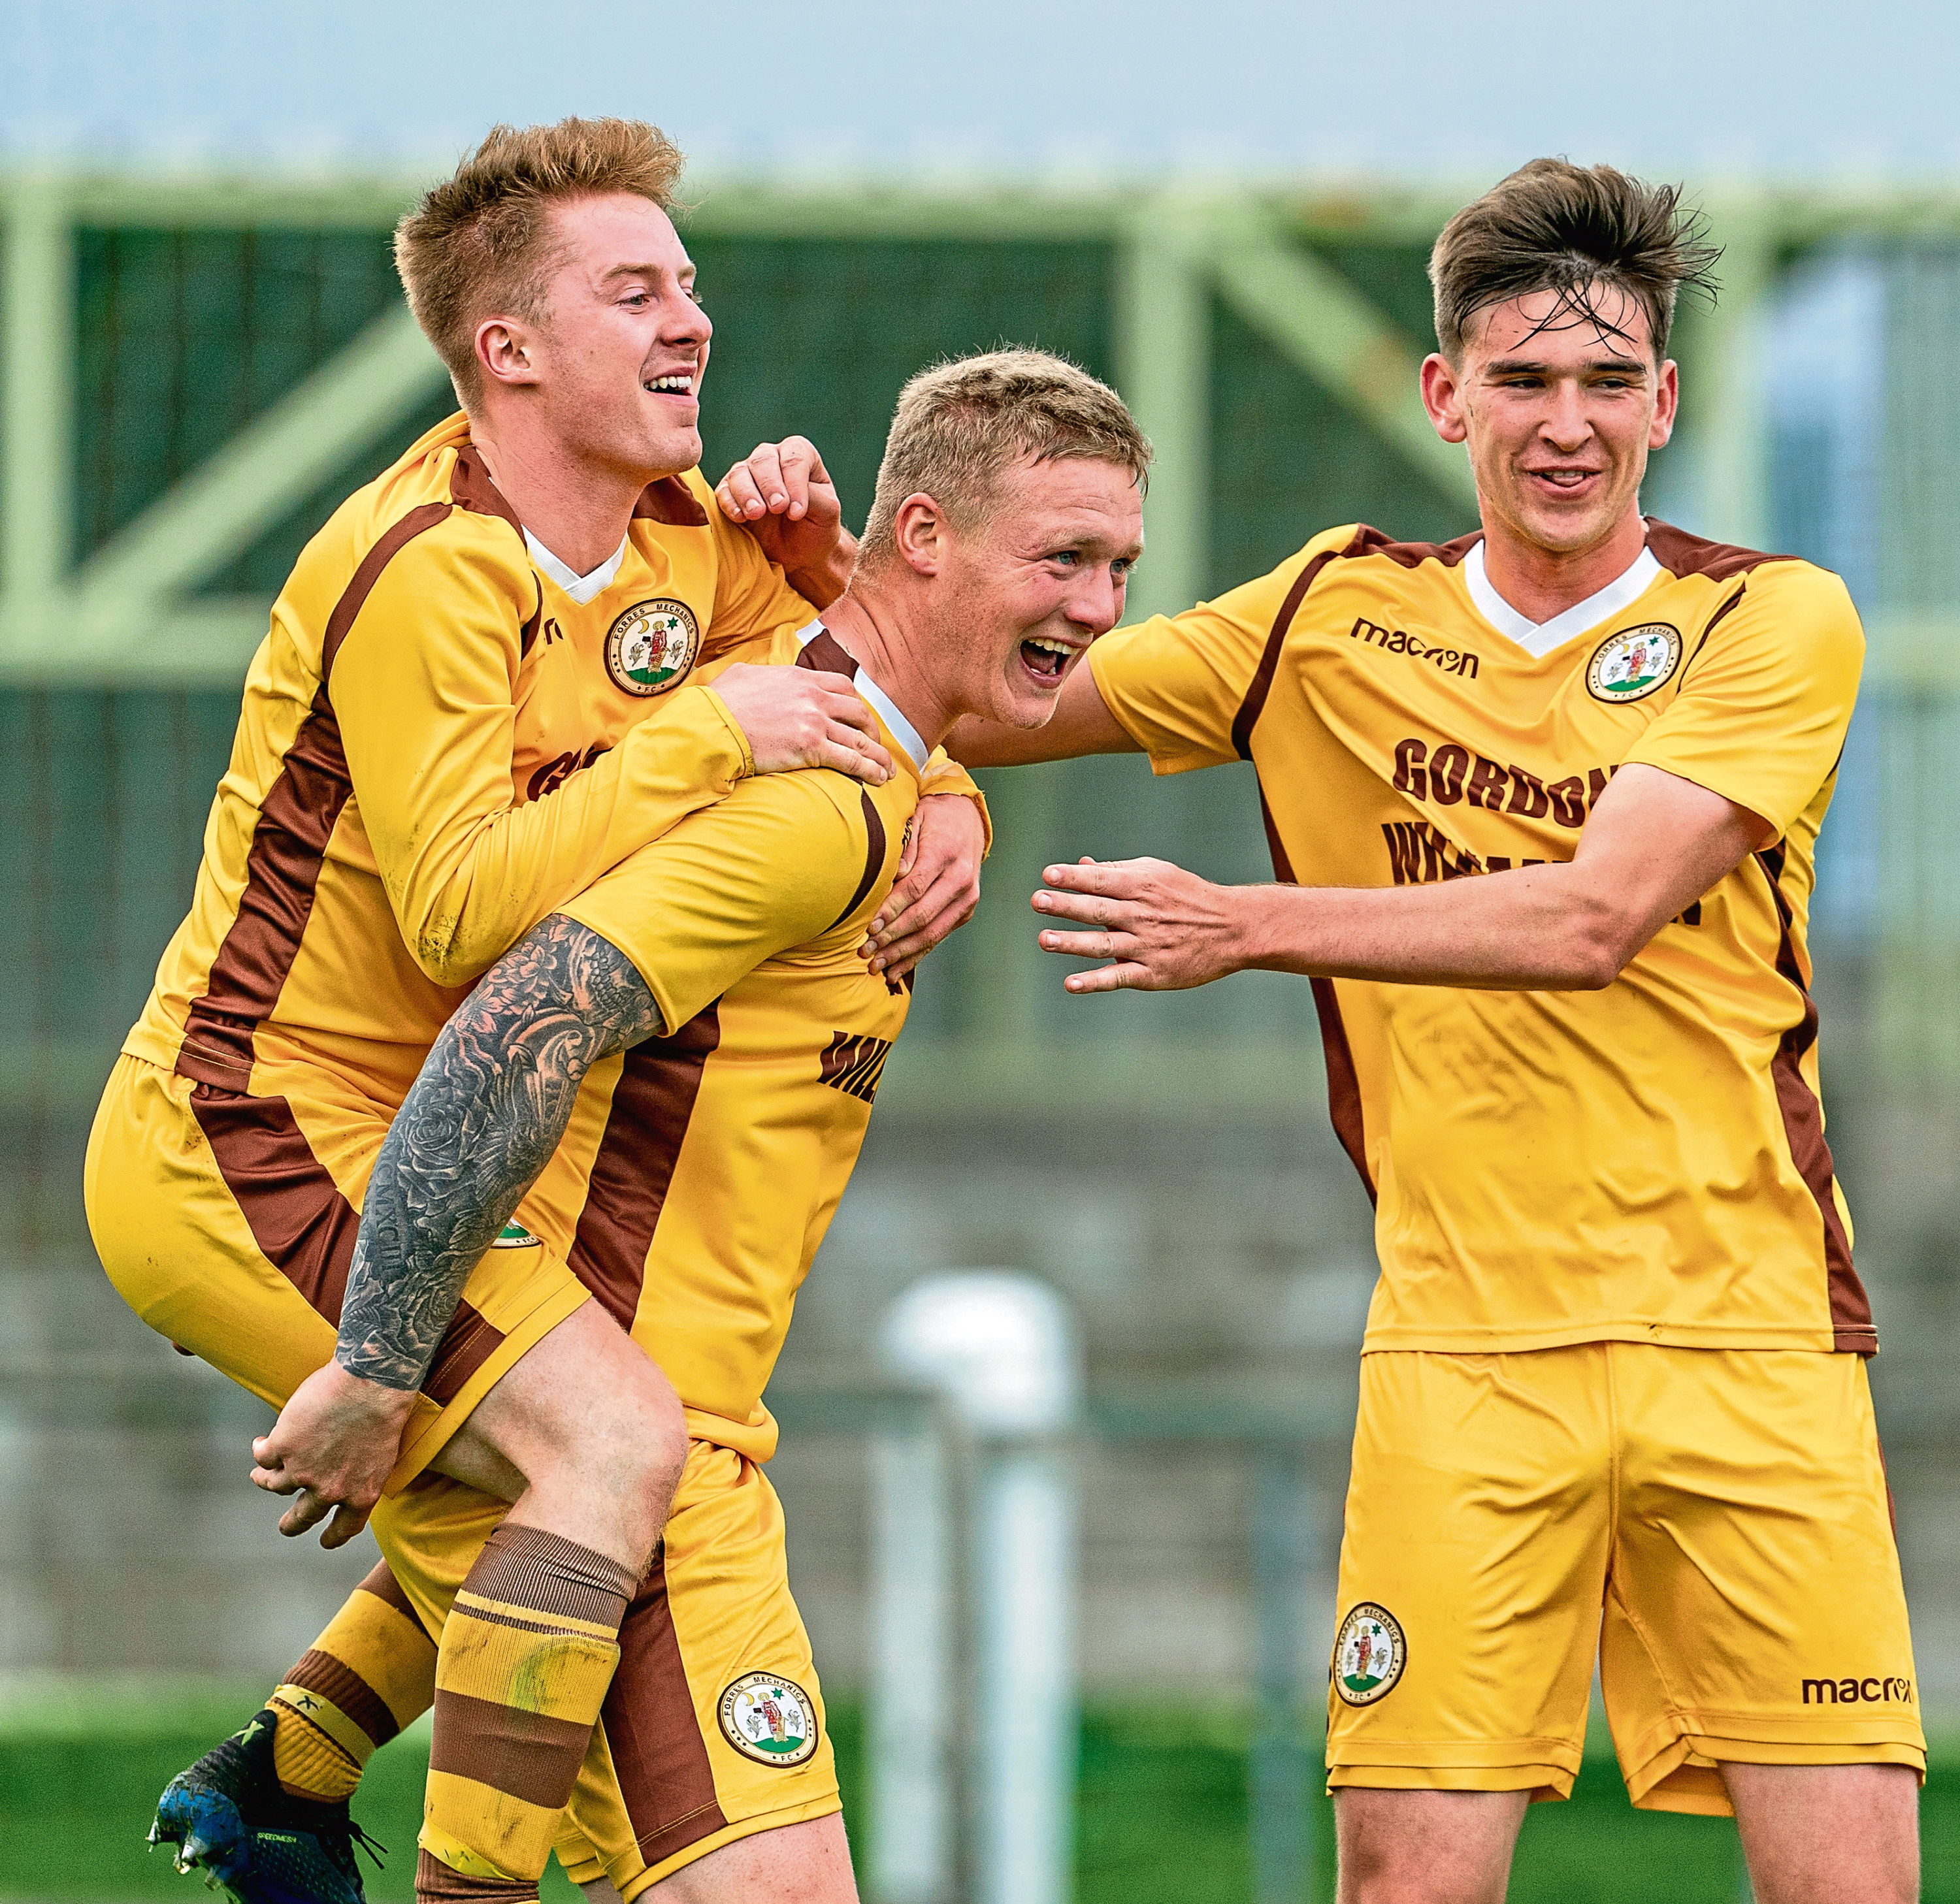 5 October 2019. uckie Thistle FC, Victoria Park, Midmar Street, Buckie, Moray, AB56 1BJ. This is from the Breedon Highland League Match between Buckie Thistle (Green and White) and Forres Mechanics (Yellow). PICTURE CONTENT:- 9 Forres Lee Fraser celebrates his Goal